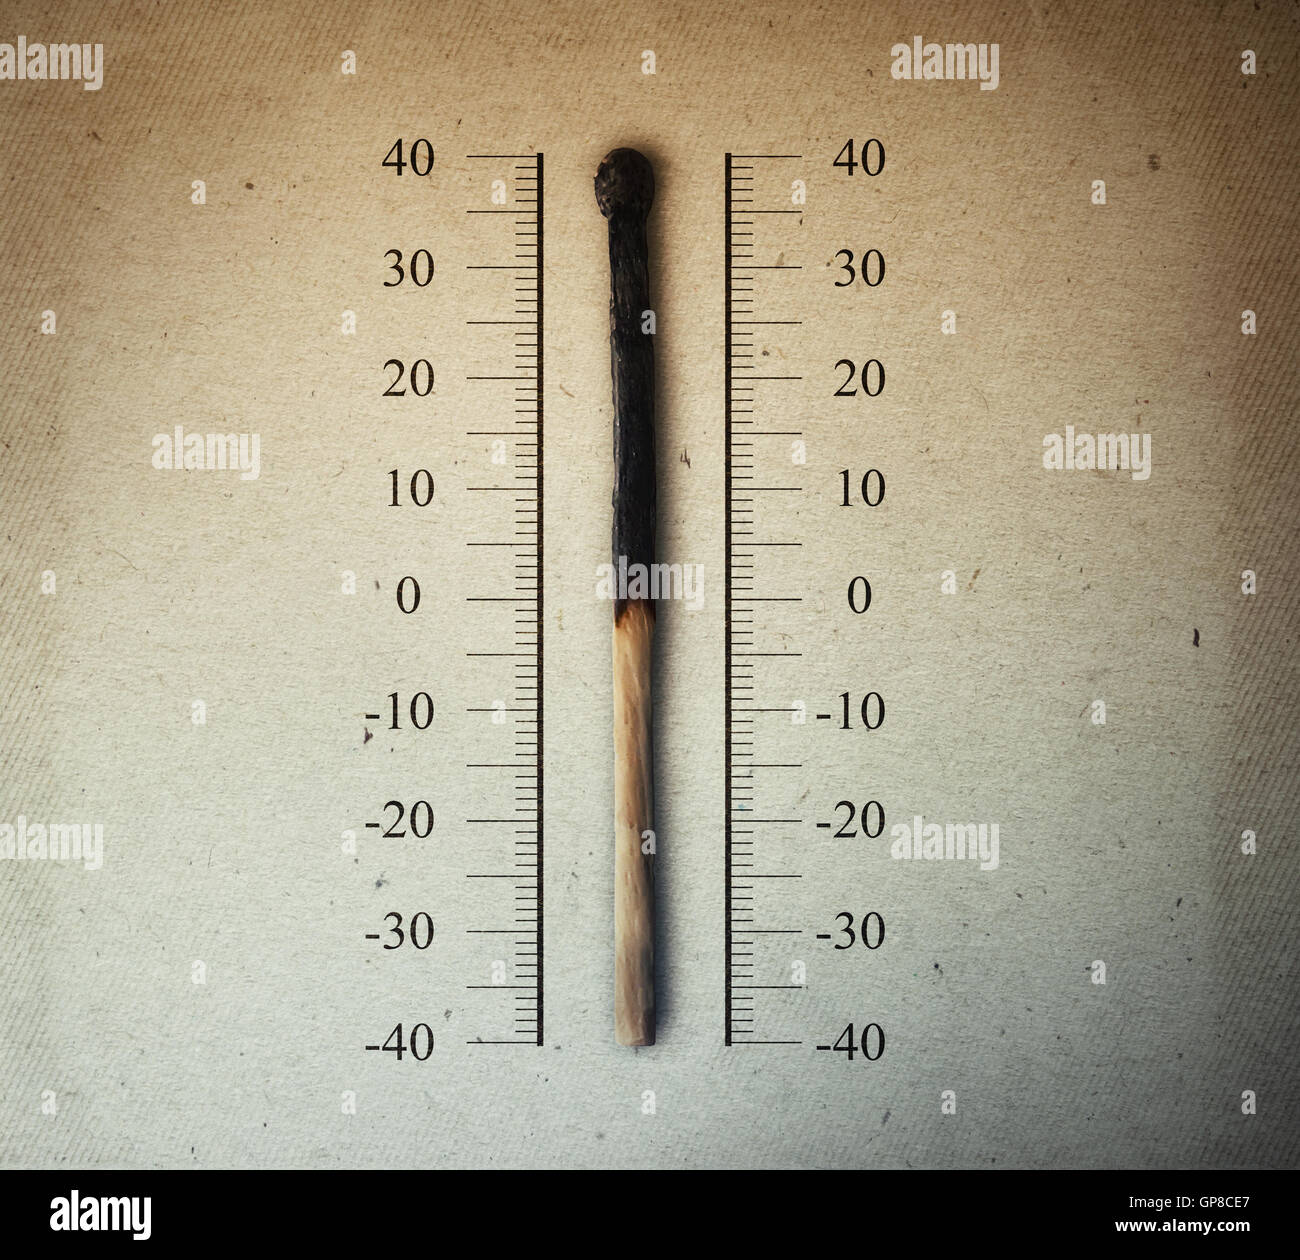 Burned match indicating temperature on a scale as a thermometer. Global warming and temperature rising concept Stock Photo